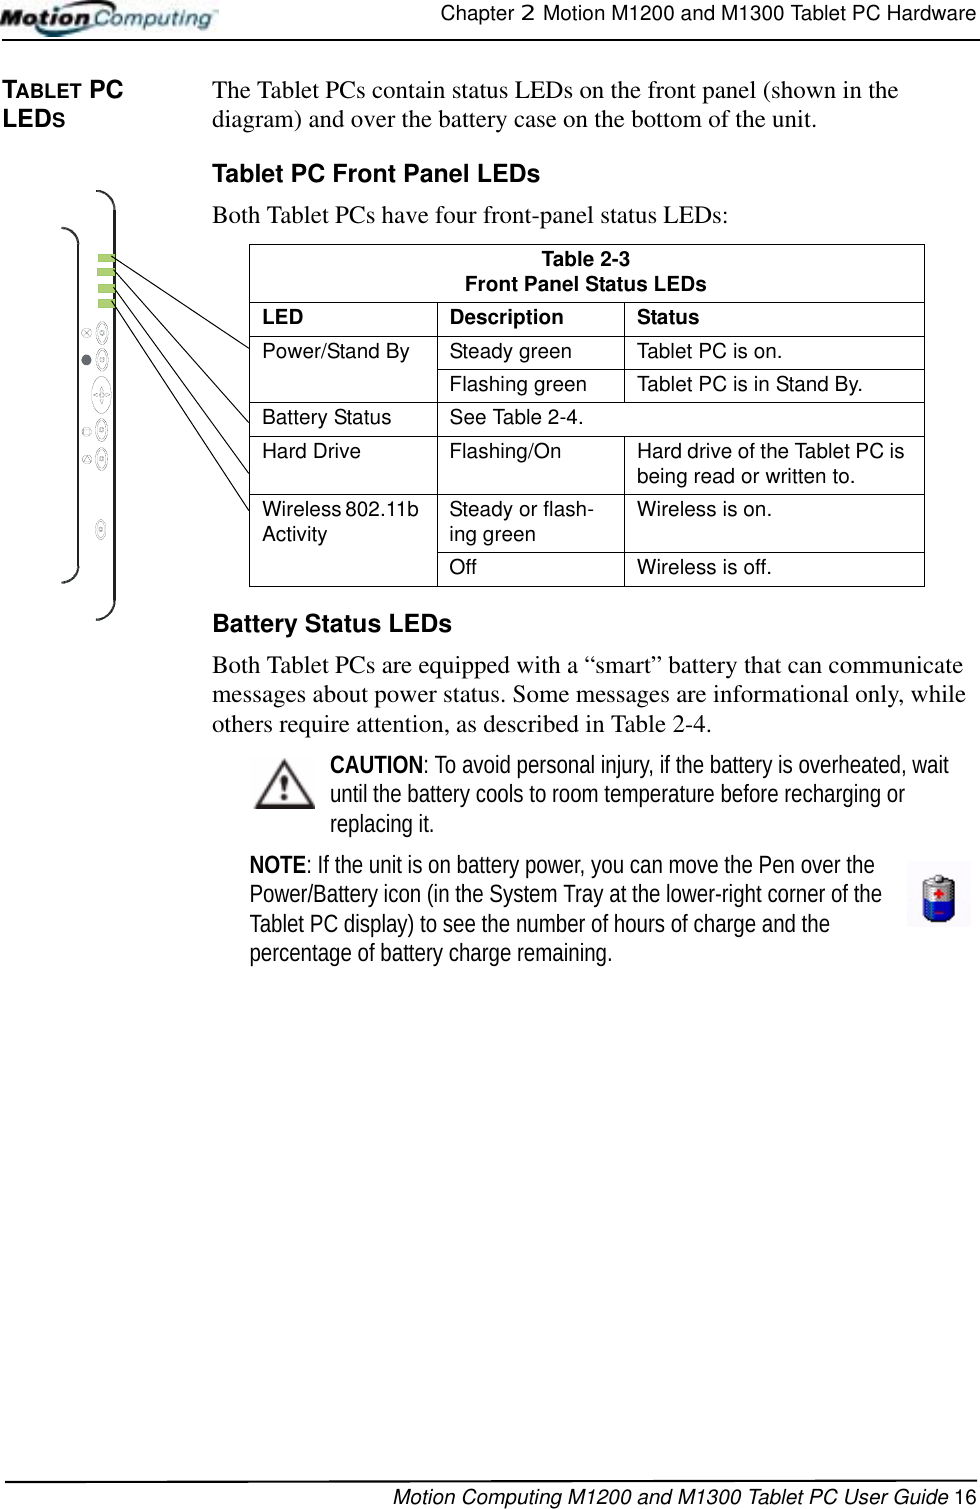 Chapter 2  Motion M1200 and M1300 Tablet PC HardwareMotion Computing M1200 and M1300 Tablet PC User Guide 16TABLET PC LEDSThe Tablet PCs contain status LEDs on the front panel (shown in the diagram) and over the battery case on the bottom of the unit.Tablet PC Front Panel LEDsBoth Tablet PCs have four front-panel status LEDs:Battery Status LEDsBoth Tablet PCs are equipped with a “smart” battery that can communicate messages about power status. Some messages are informational only, while others require attention, as described in Table 2-4.CAUTION: To avoid personal injury, if the battery is overheated, wait until the battery cools to room temperature before recharging or replacing it.NOTE: If the unit is on battery power, you can move the Pen over the Power/Battery icon (in the System Tray at the lower-right corner of the Tablet PC display) to see the number of hours of charge and the percentage of battery charge remaining.Table 2-3Front Panel Status LEDsLED Description StatusPower/Stand By Steady green Tablet PC is on.Flashing green Tablet PC is in Stand By.Battery Status See Table 2-4.Hard Drive Flashing/On Hard drive of the Tablet PC is being read or written to.Wireless 802.11b Activity Steady or flash-ing green Wireless is on.Off Wireless is off.